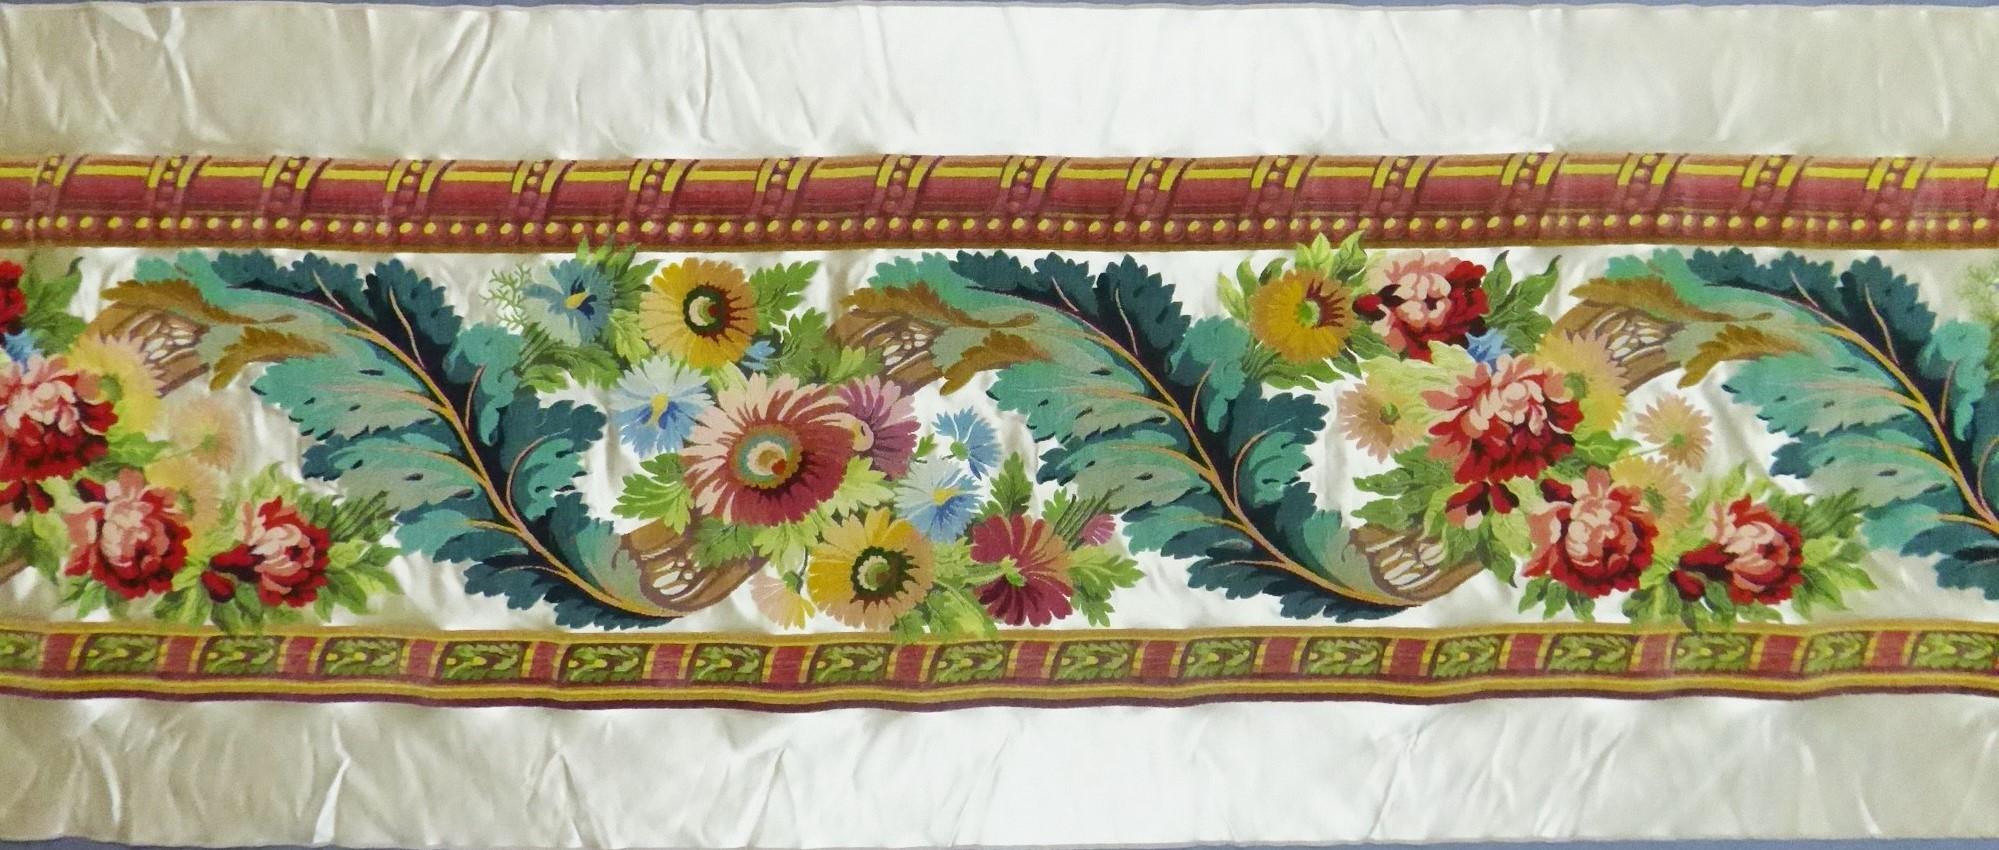 Circa 1970
France

Border of the room of the Empress Josephine at the Castle of Fontainebleau. Satin brocade, caterpillar and silk, rivers of flowers and ornamental oak leaves Patron TC N ° 10337. The famous manufacture of Lyon Tassinari and Chatel